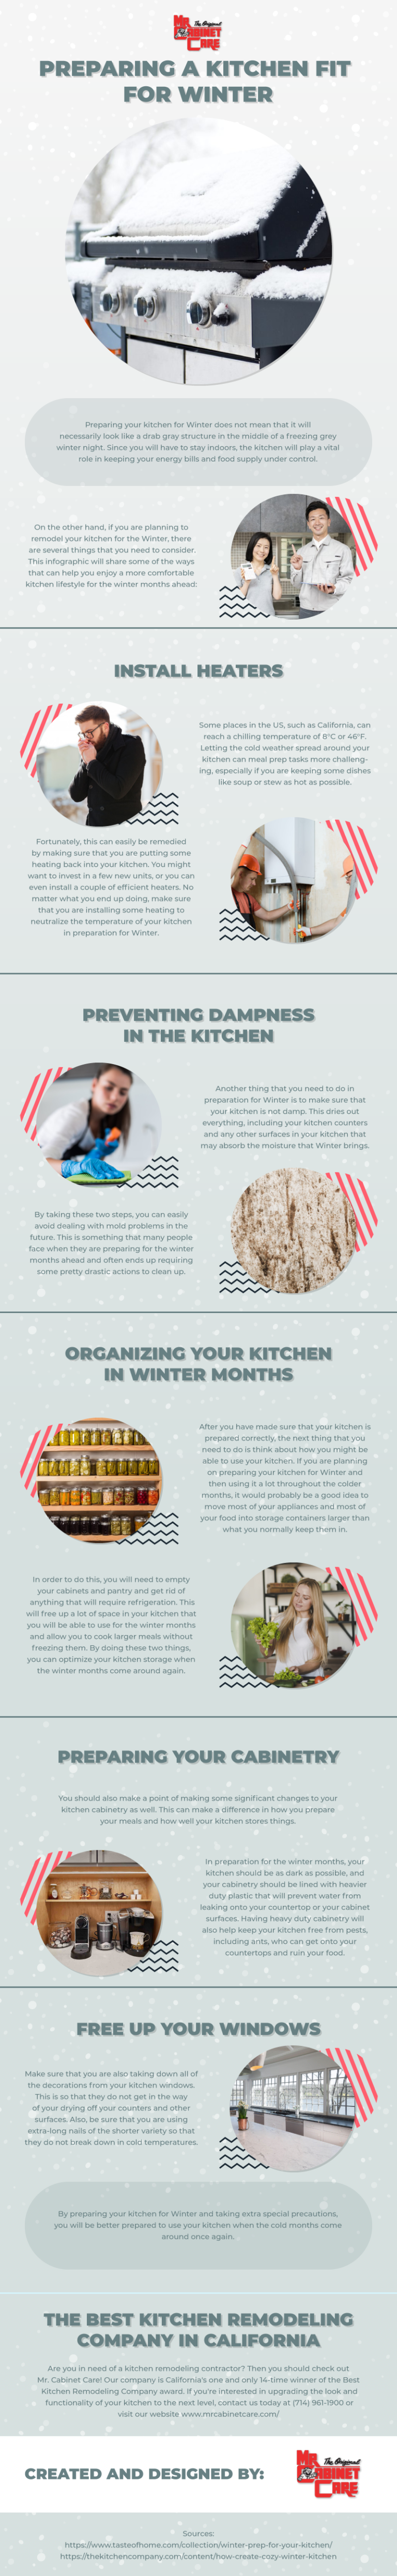 Preparing a Kitchen fit for Winter